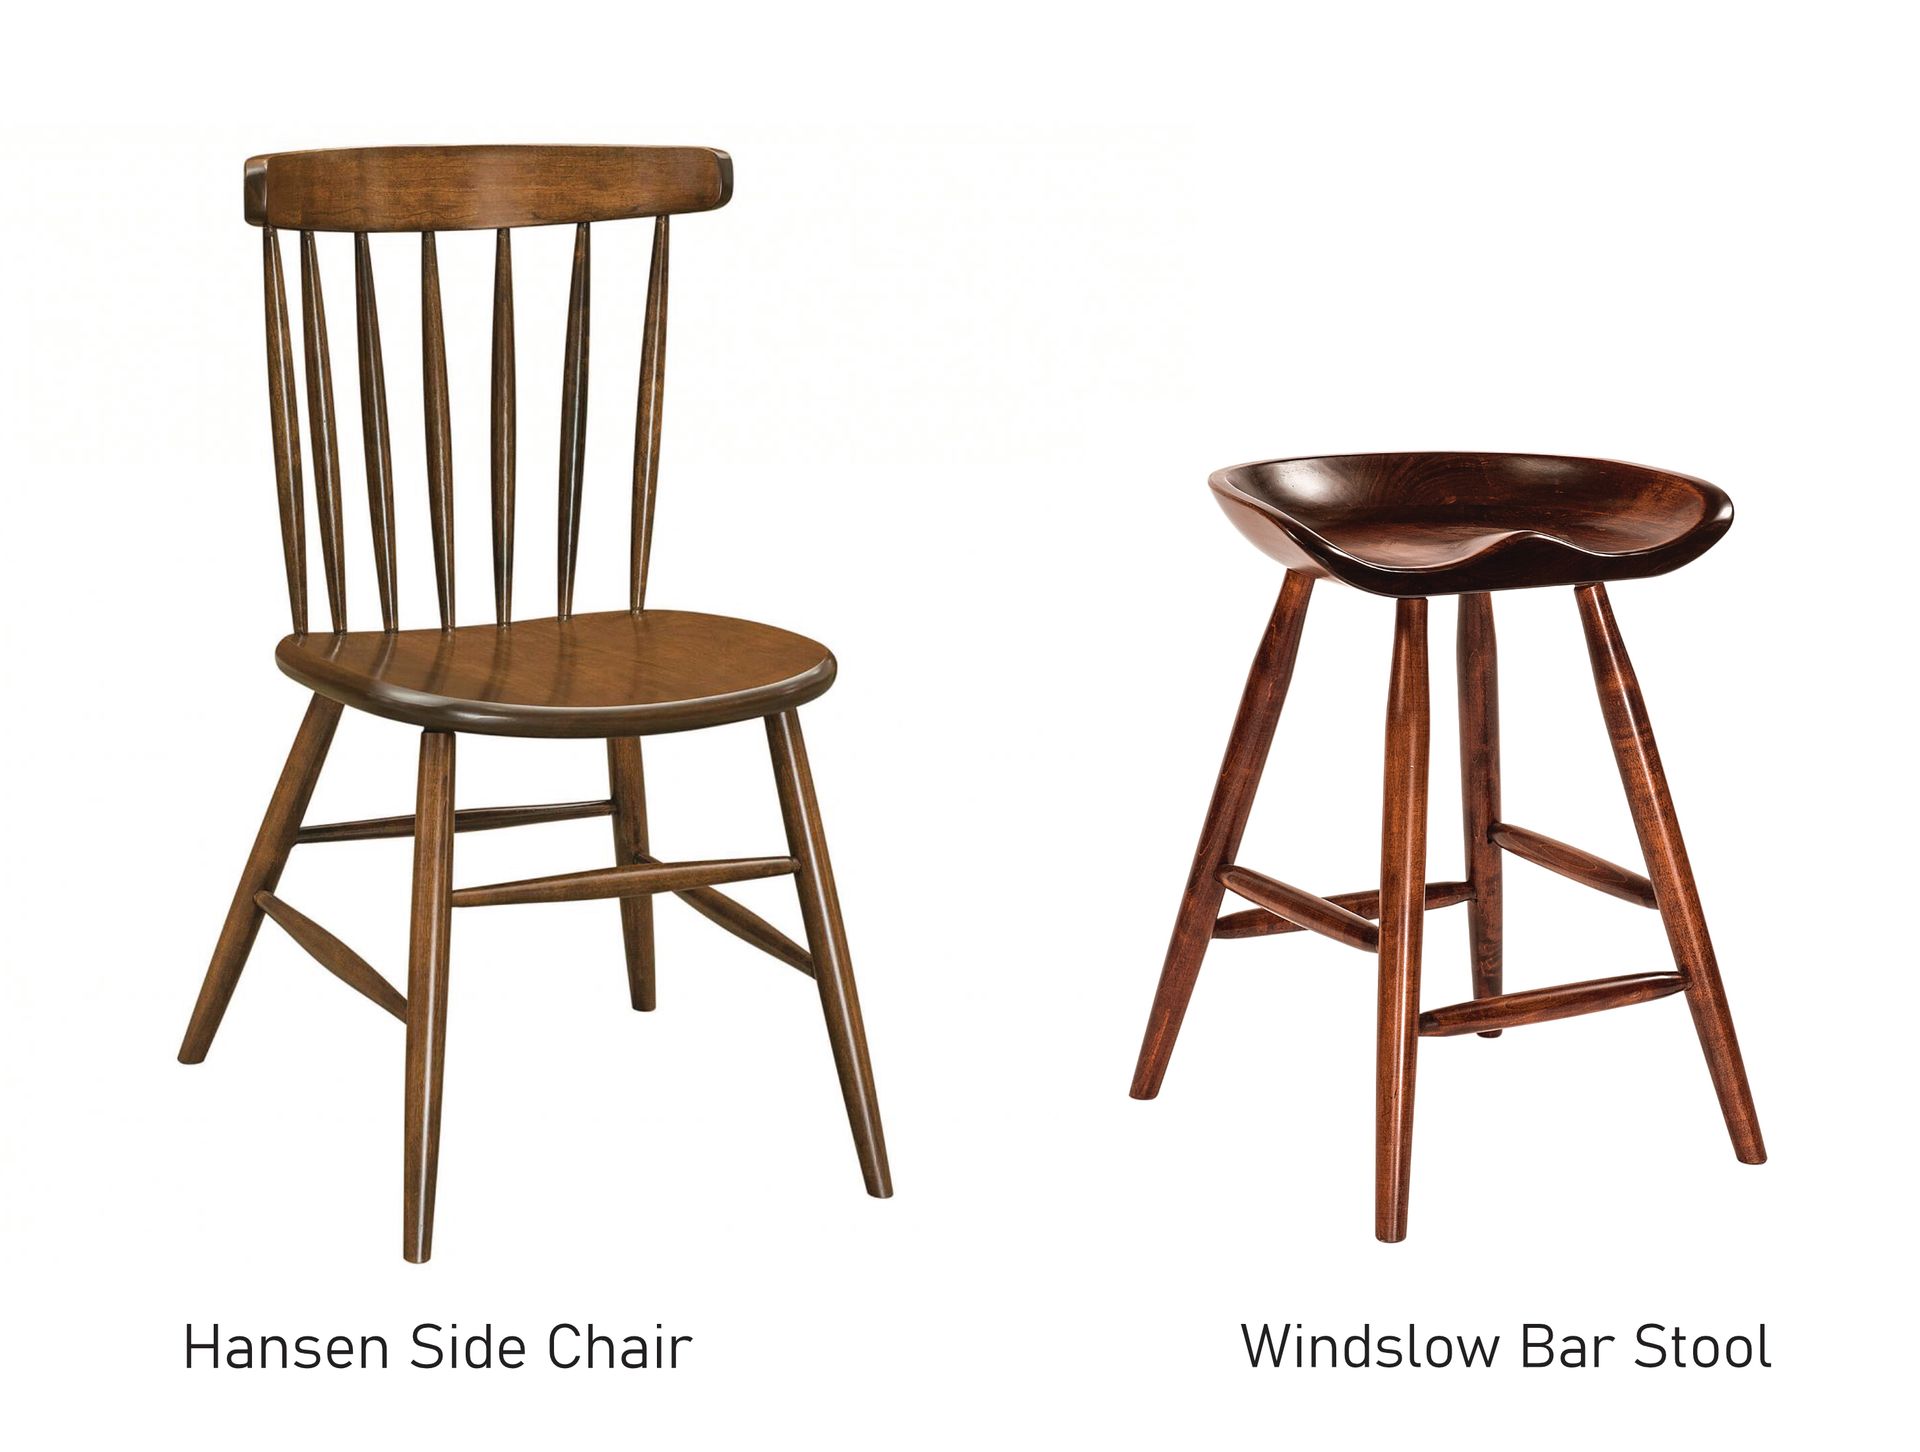 Pairing Dining Chairs And Bar Stools, Dining Room Table And Chairs With Matching Bar Stools